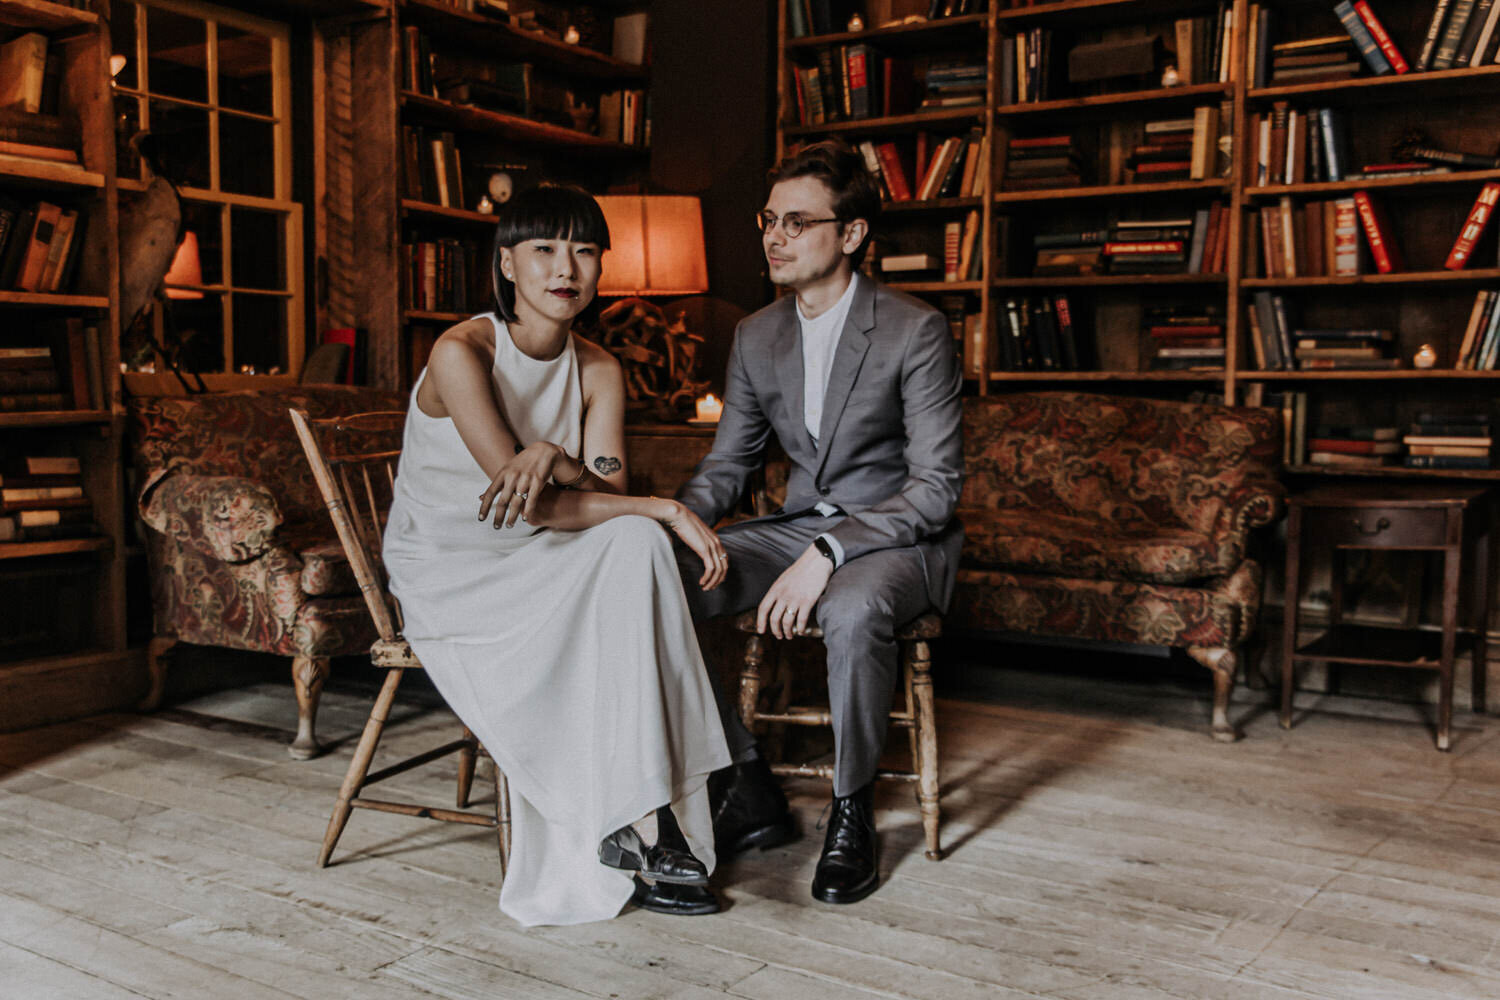 new york lowwer east side wedding intimate ceremony eclectic modern5.jpg